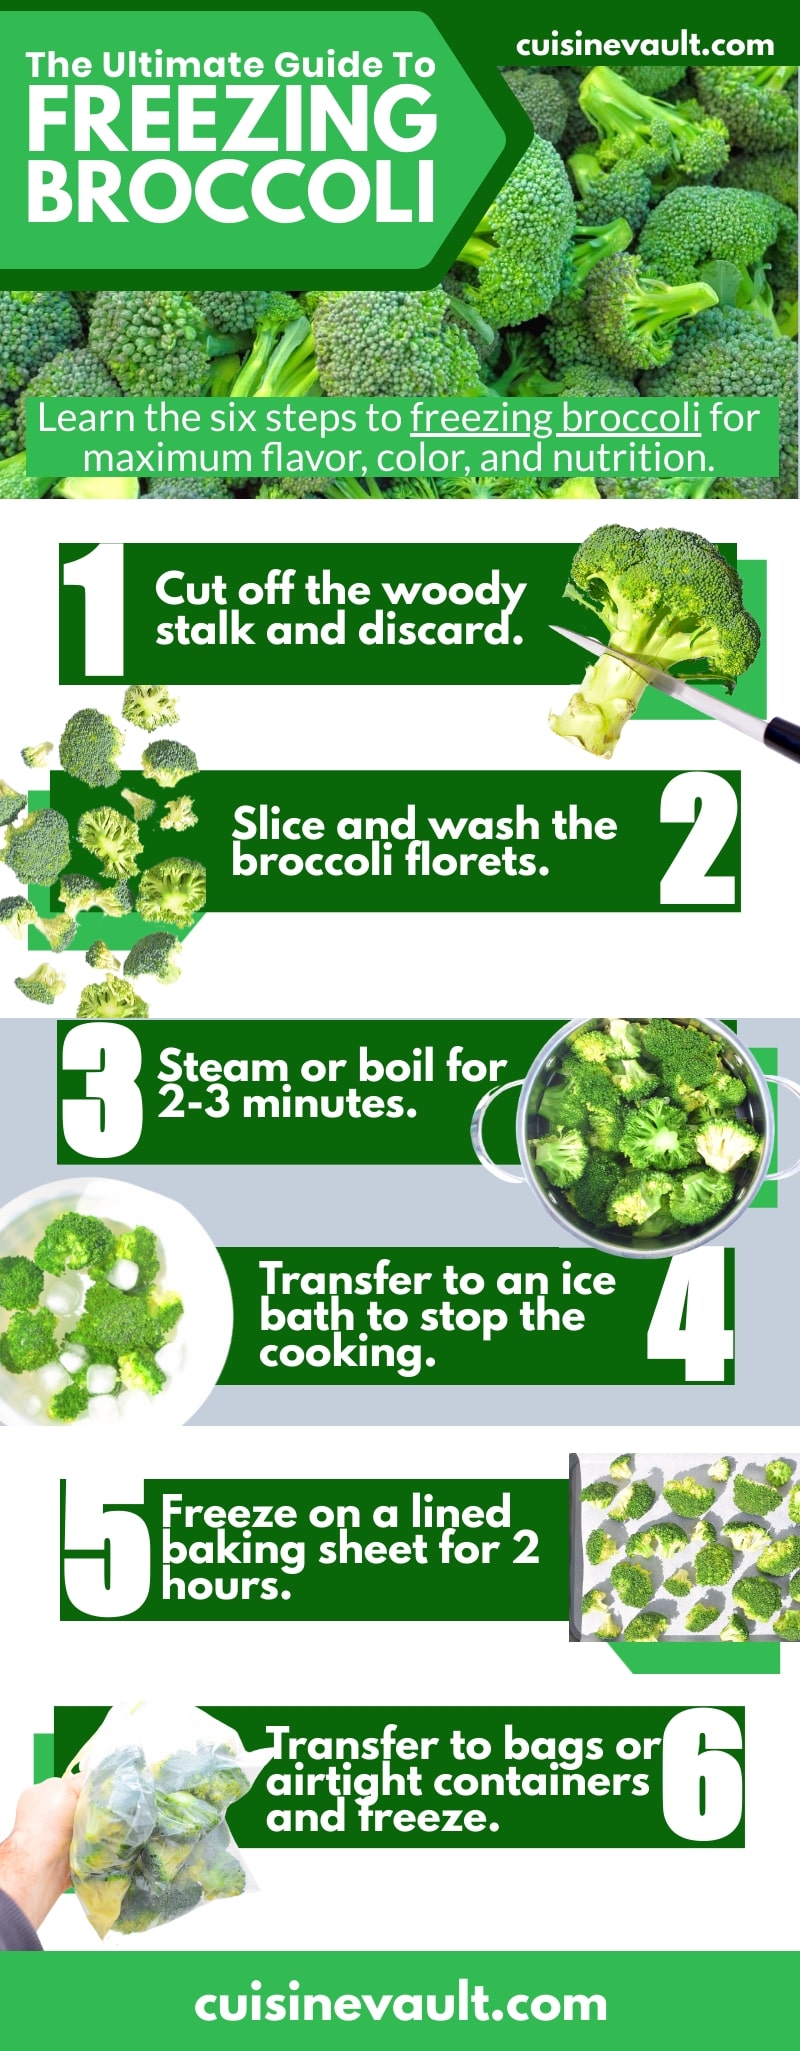 How To Freeze Broccoli – A Beginner’s Guide